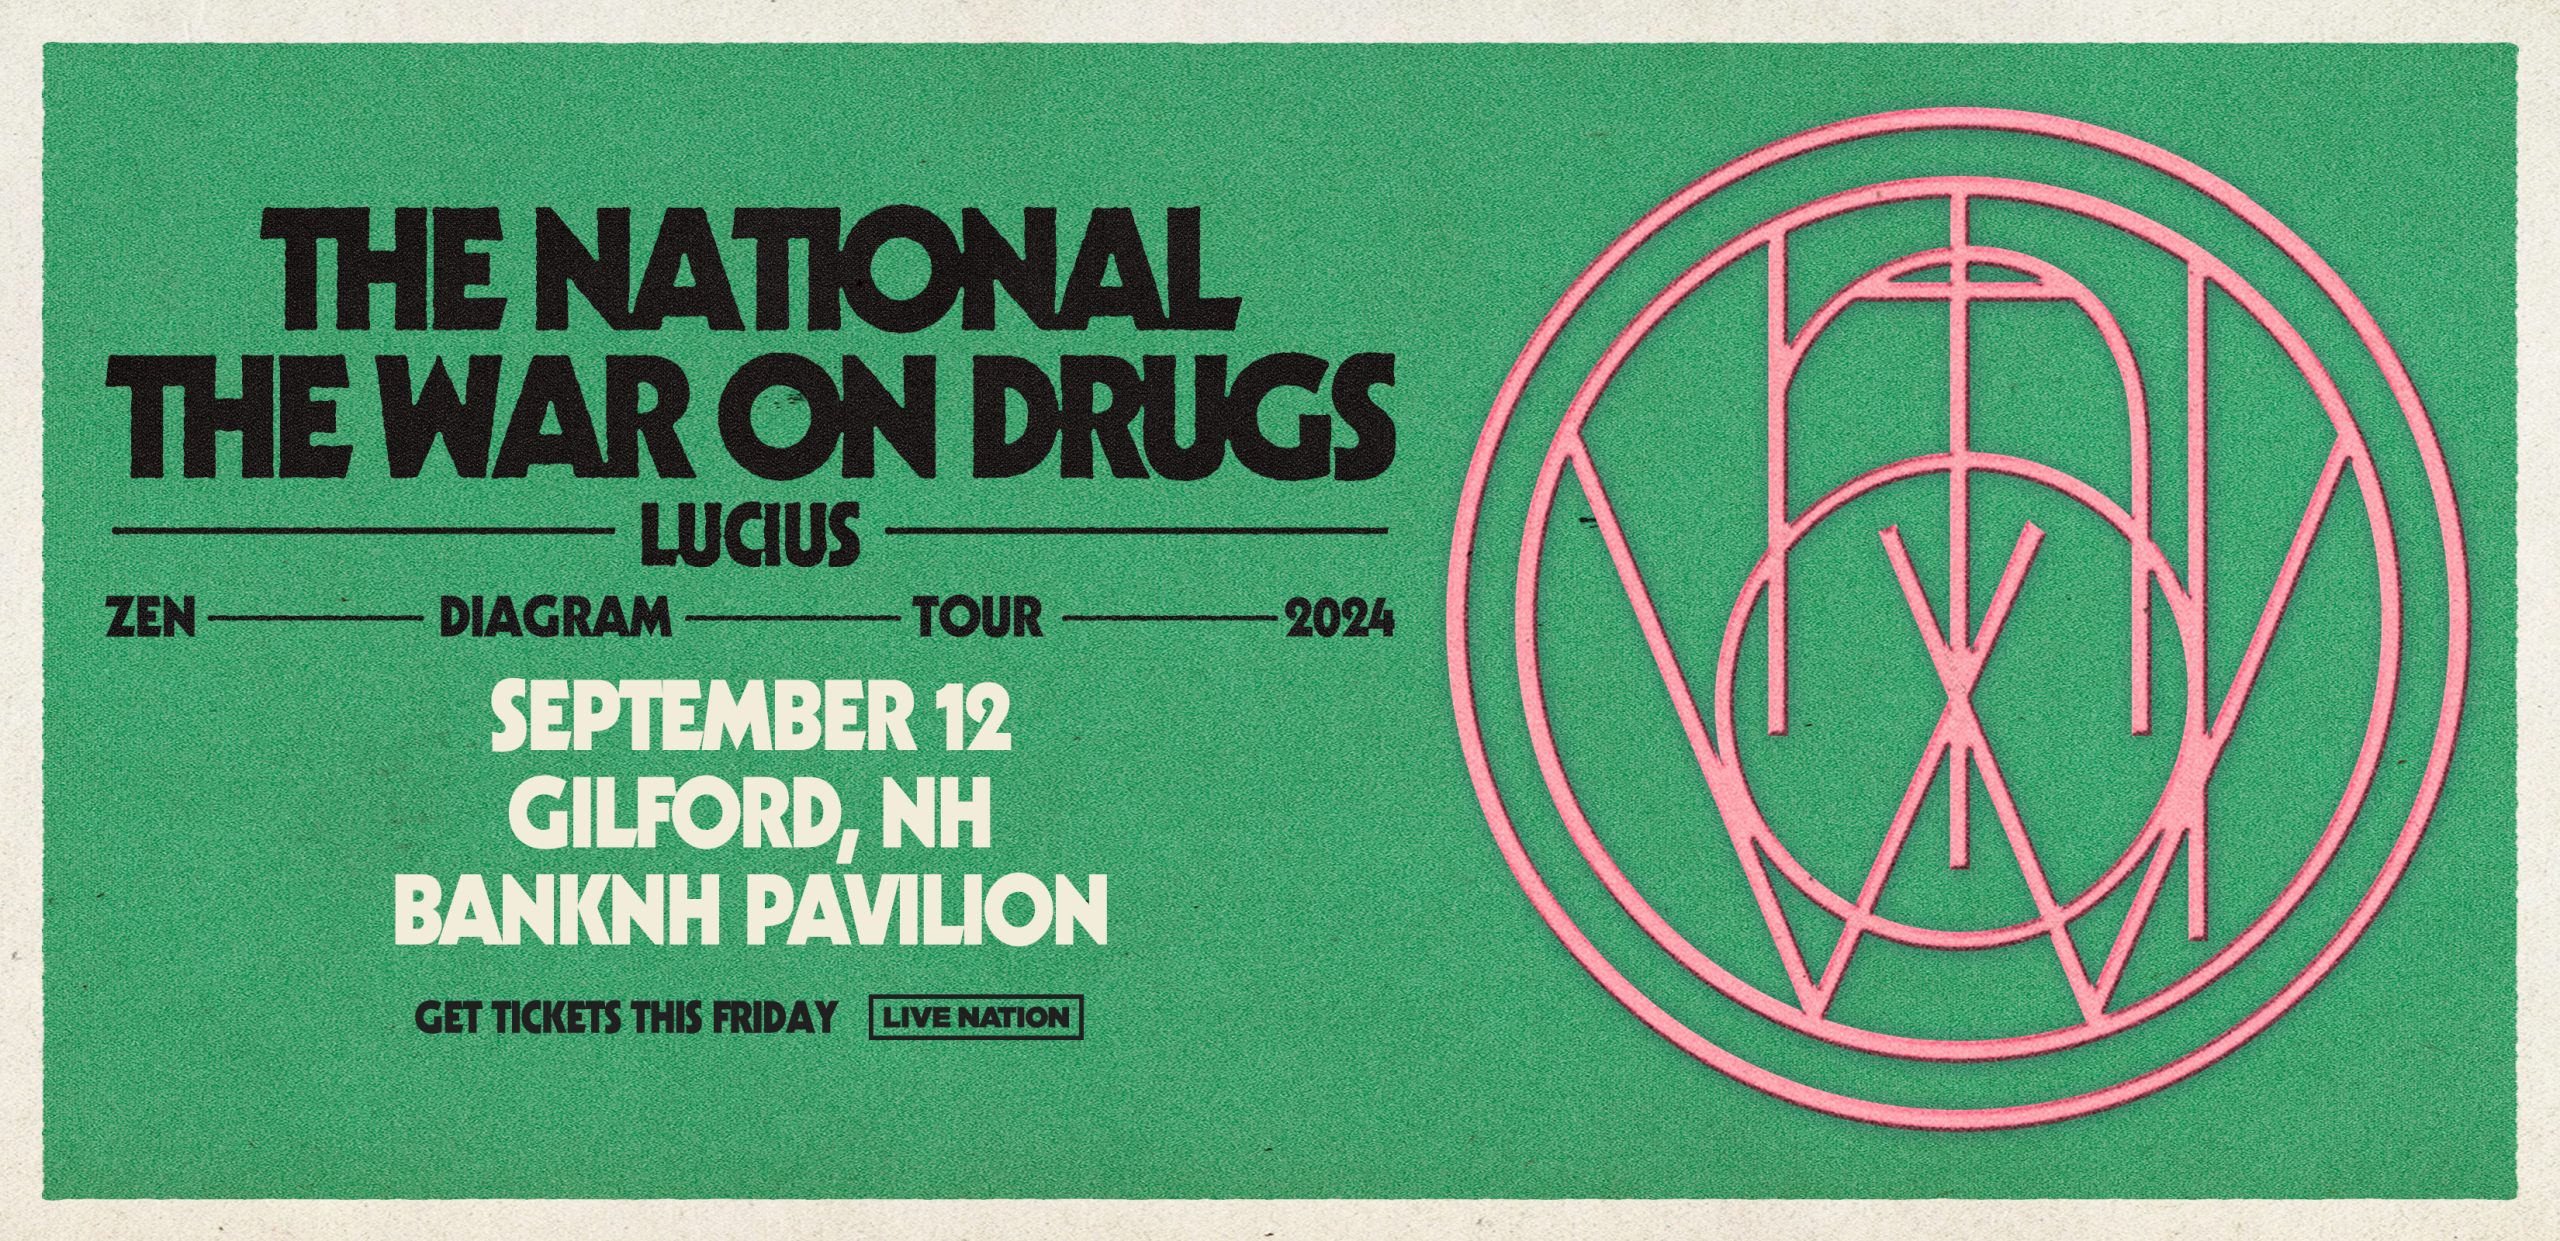 Win Tickets to The National & The War on Drugs